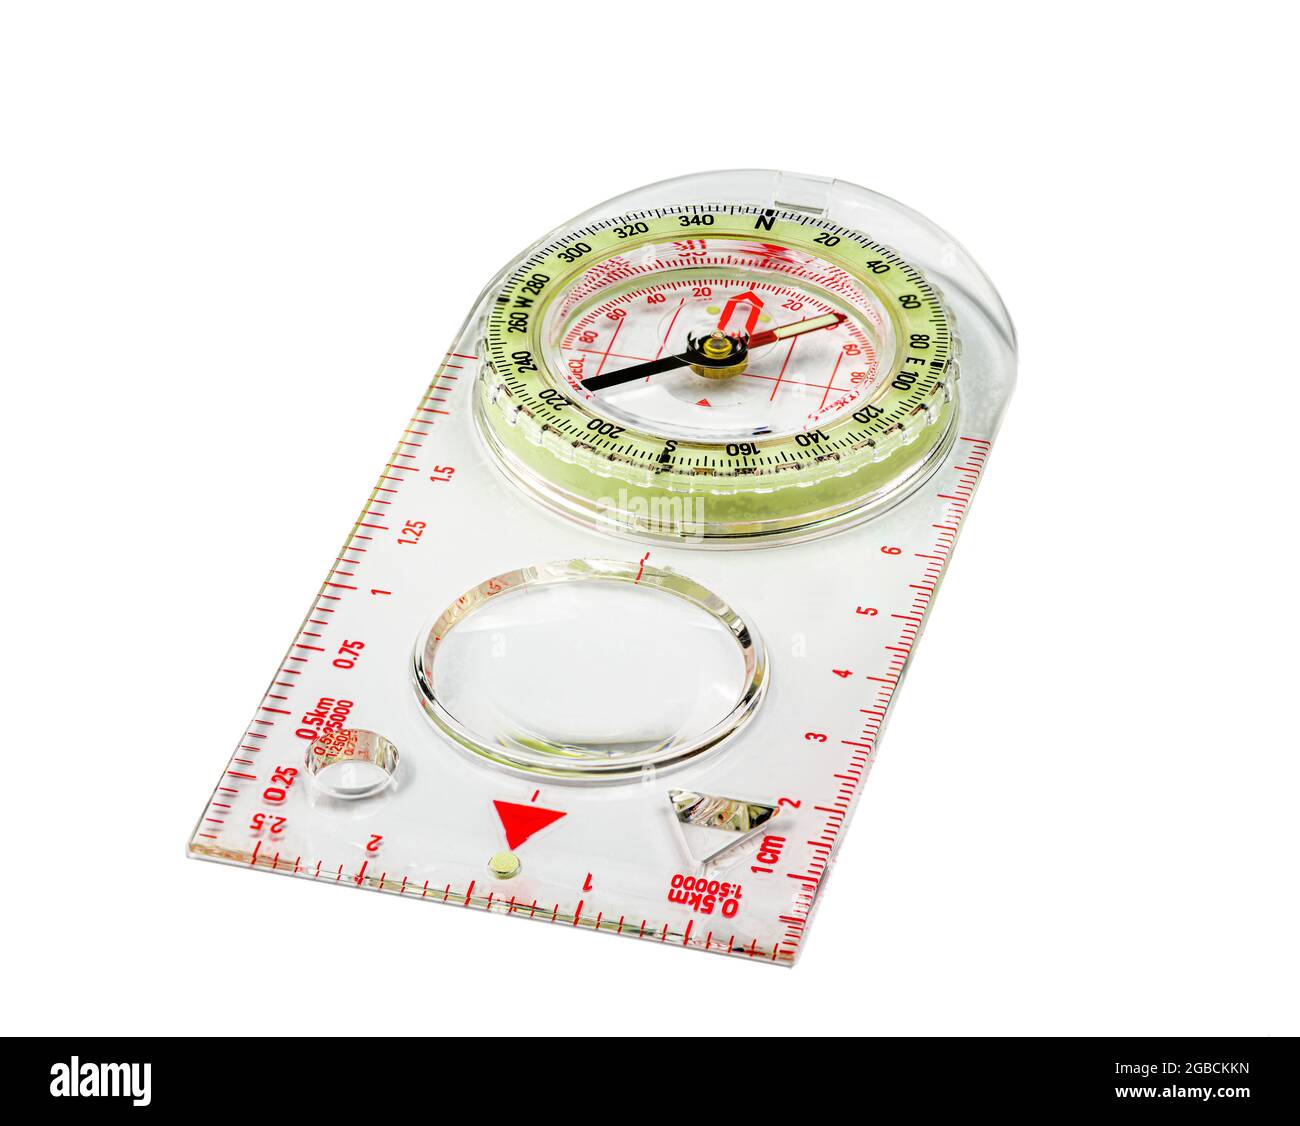 Orienteering Compass High Resolution Stock Photography and Images - Alamy